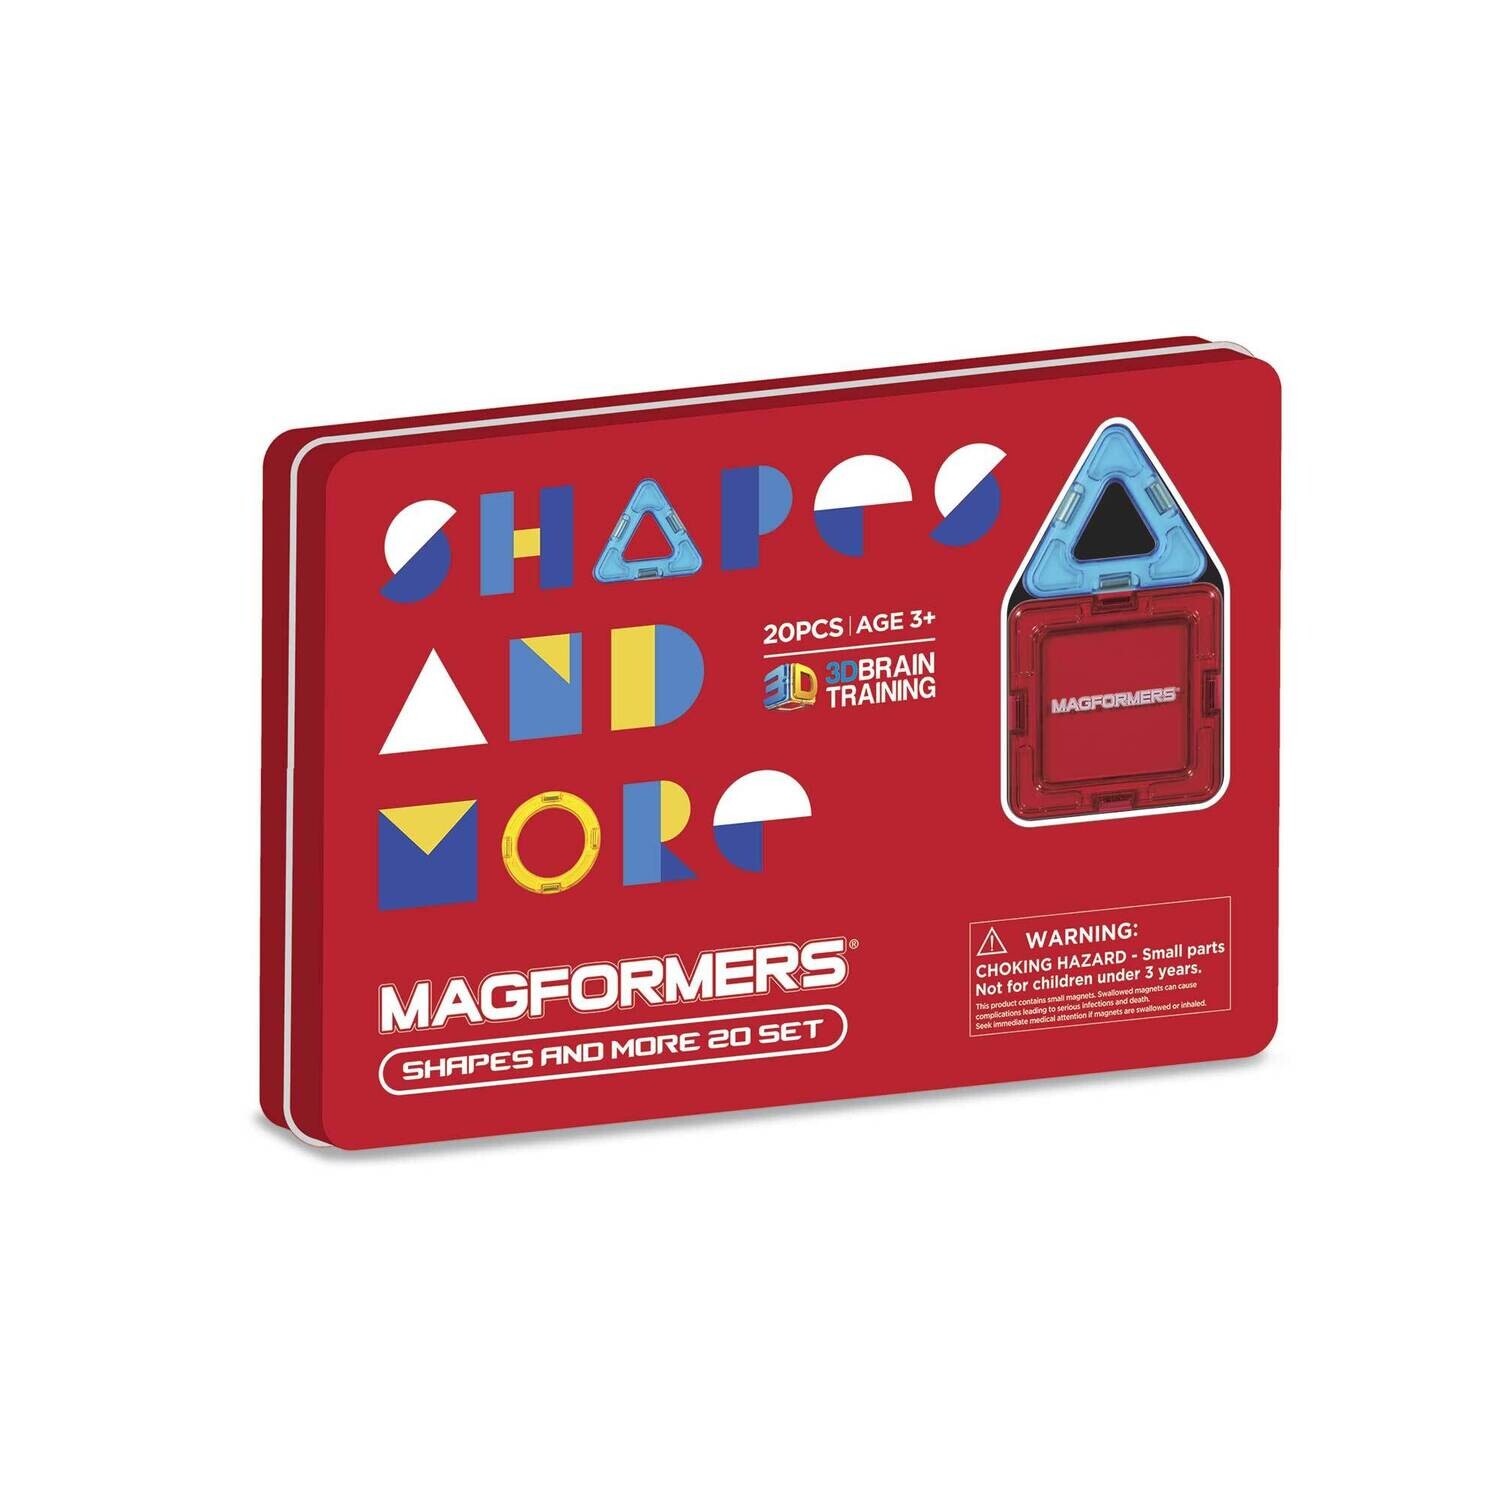 Magformers Shapes and More 20 Pieces